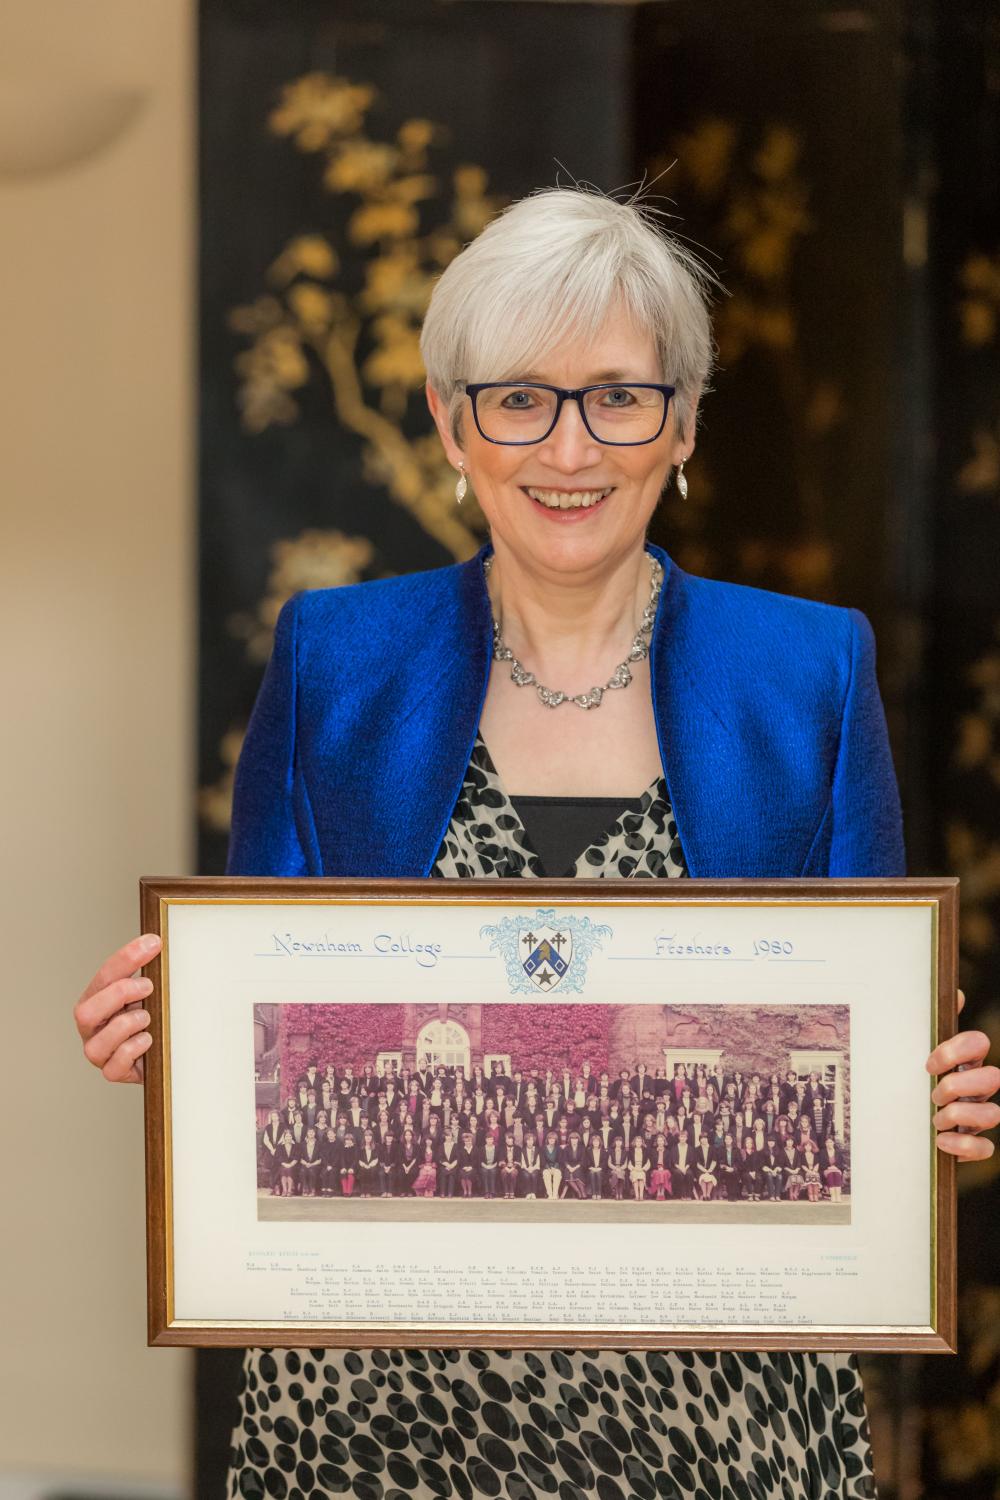 Alison Rose holding her matriculation photo